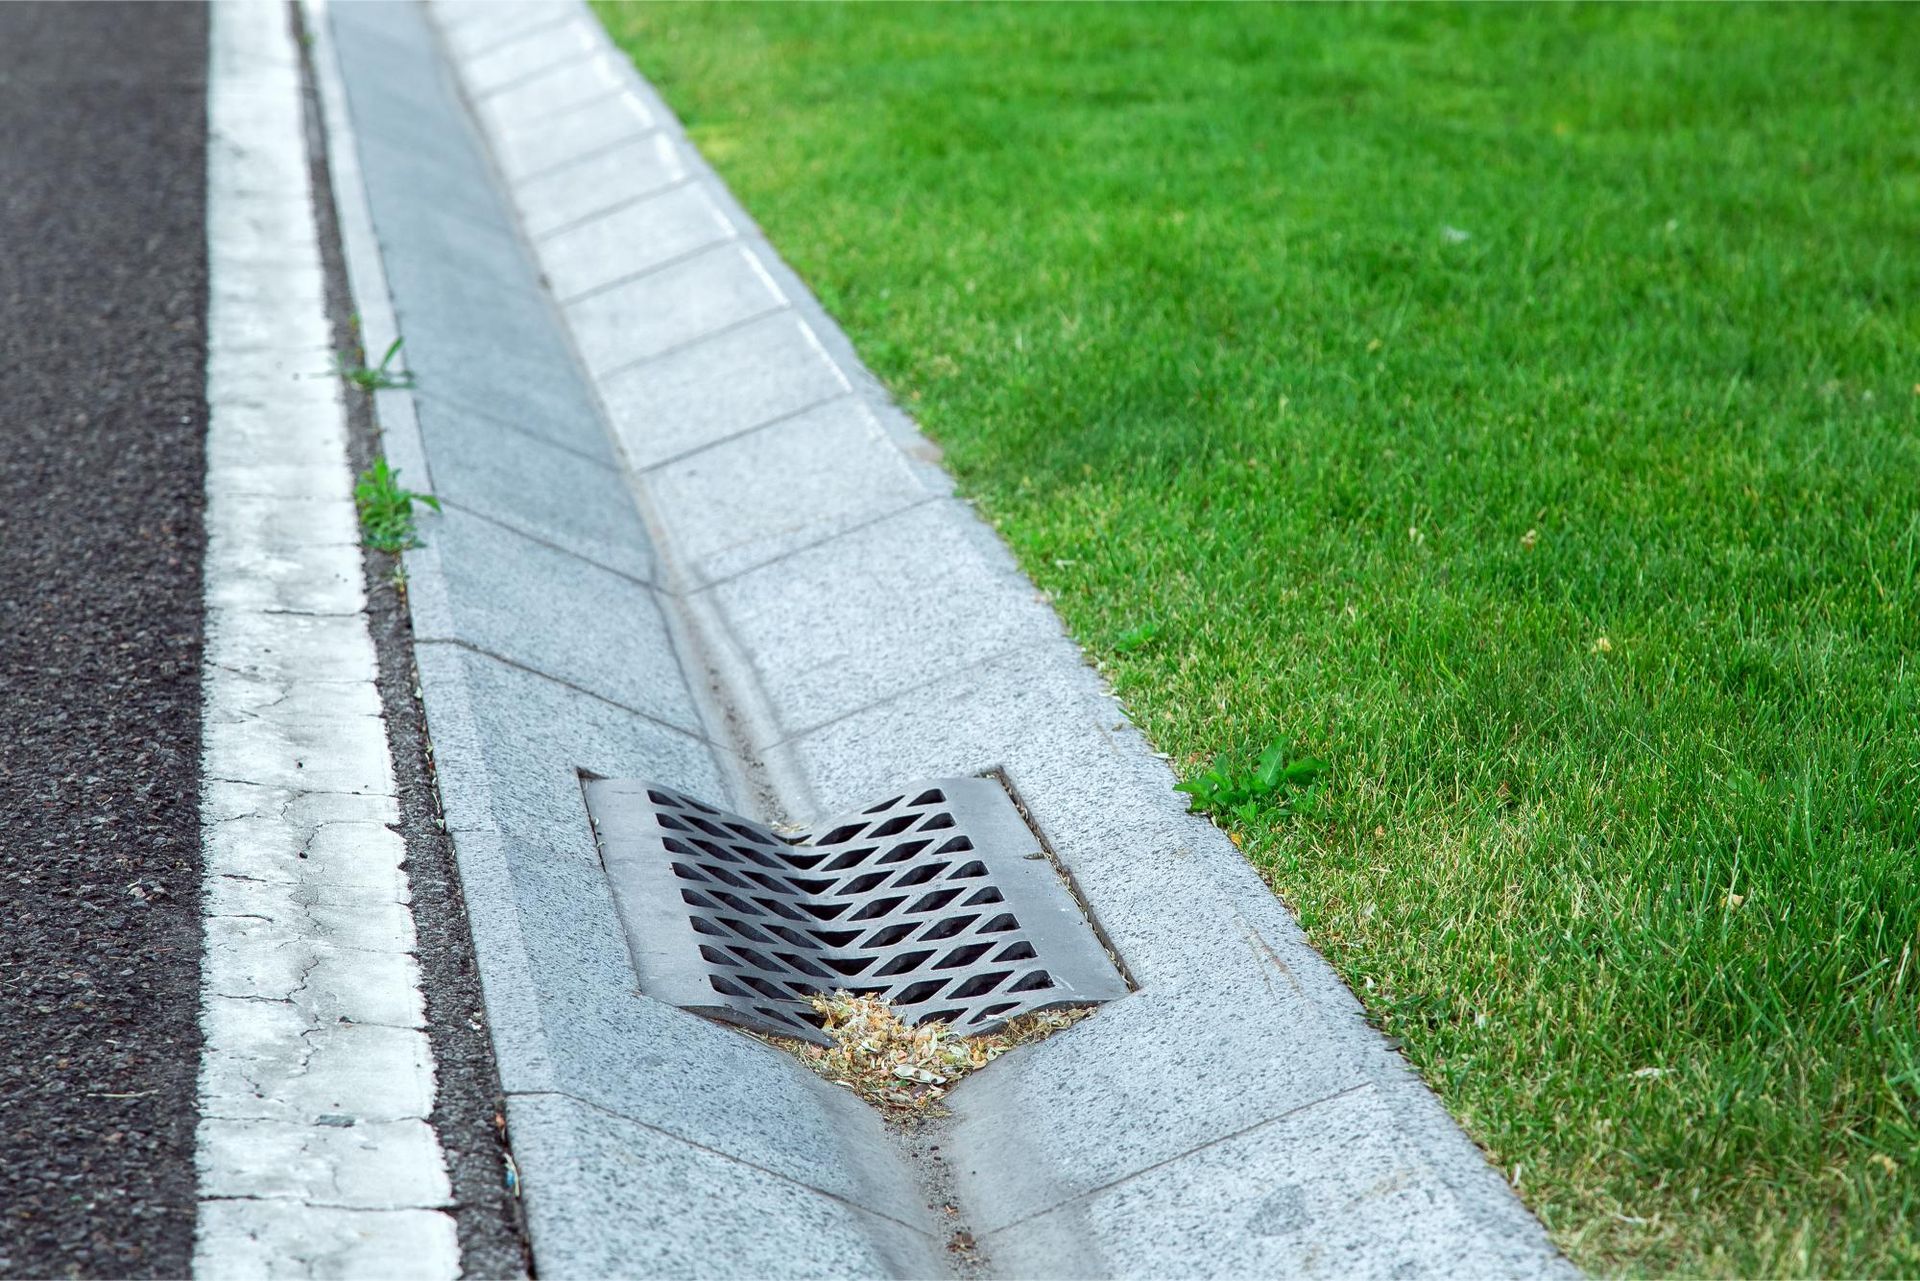 A drain on the side of a road next to a grassy area.